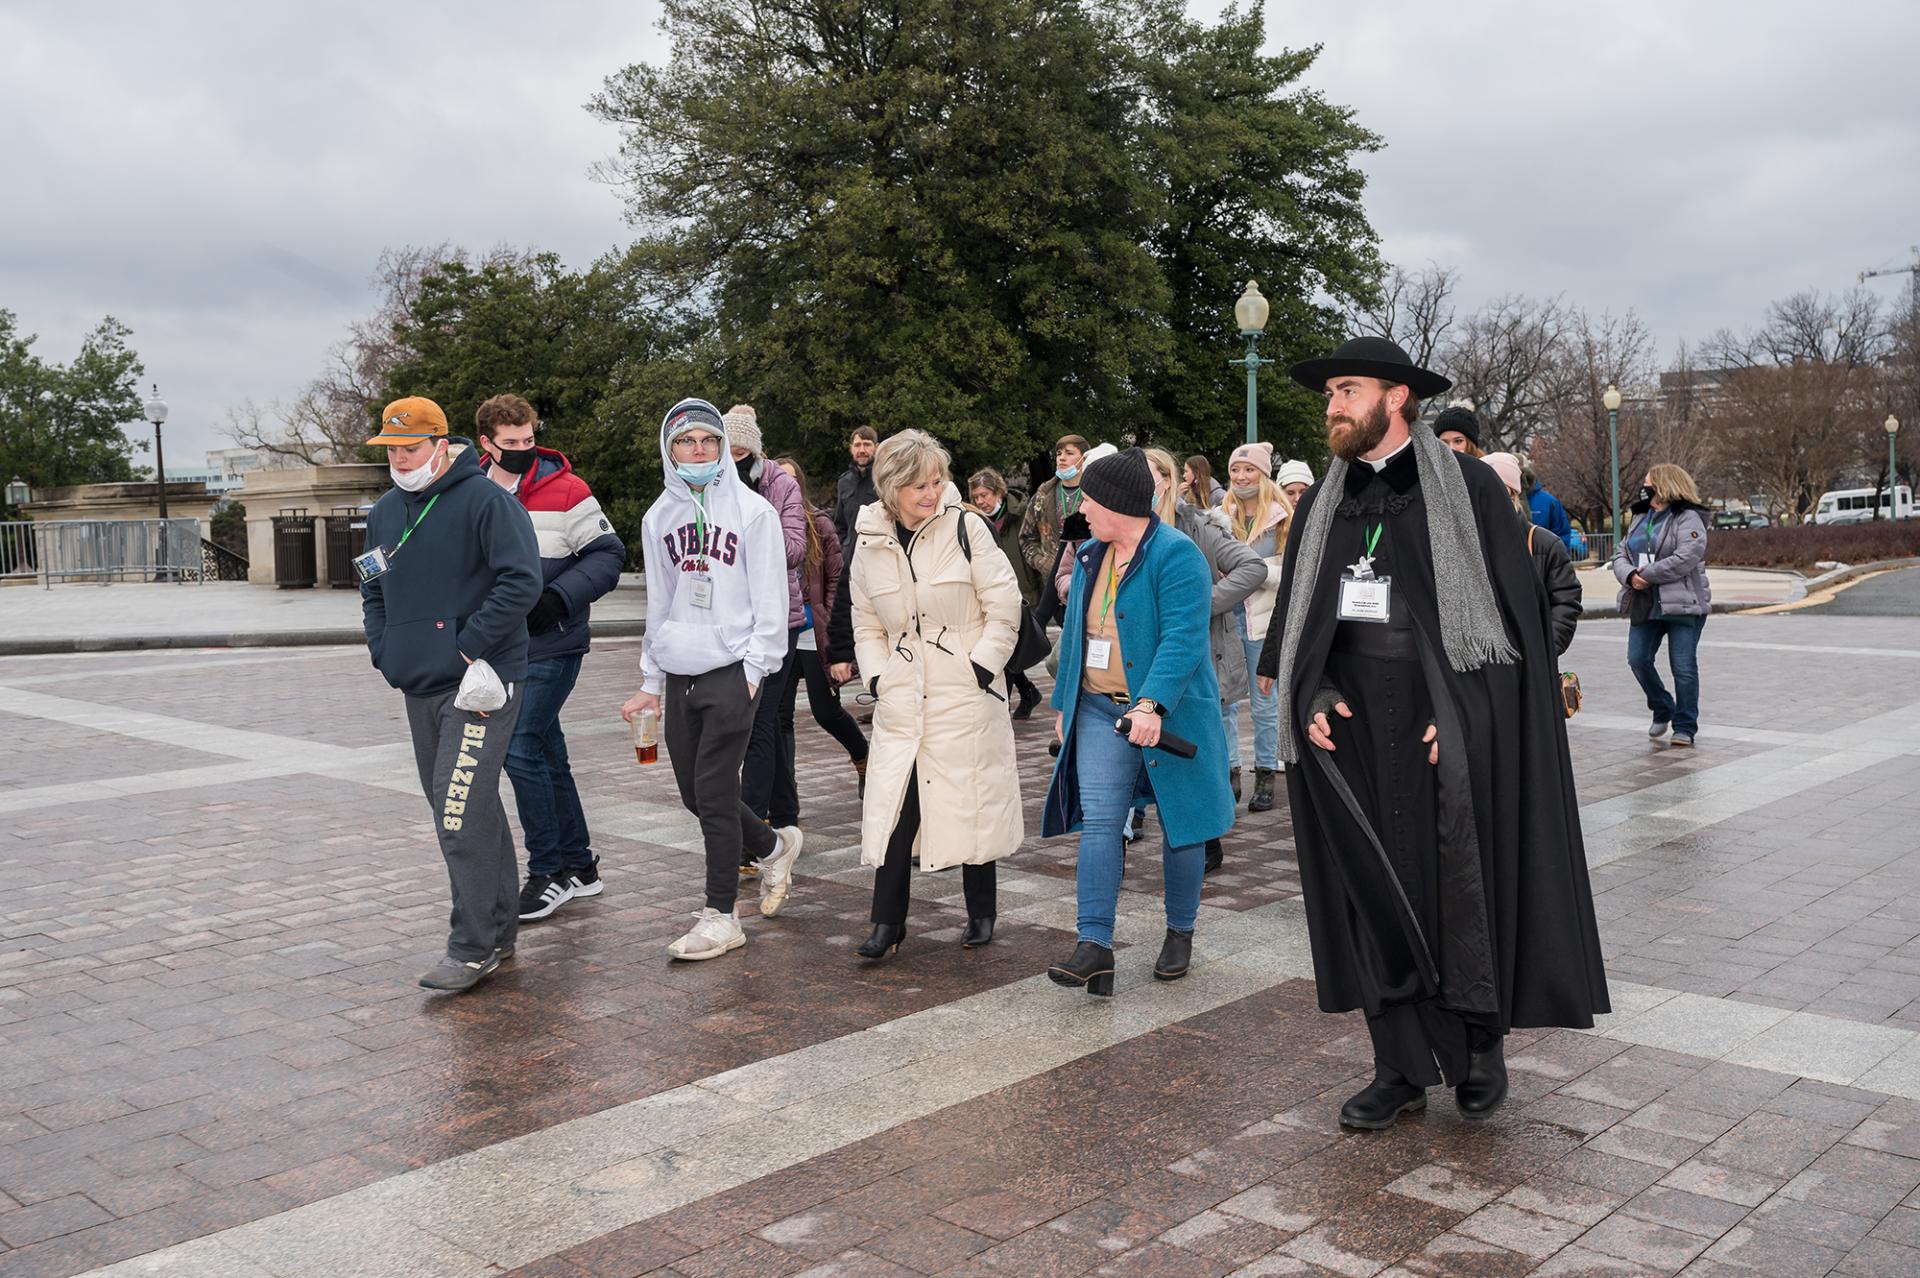 Senator Hyde-Smith escorts students from the St. Mary Basilica/Cathedral School in Natchez to the Capitol as part of their trip to Washington for the March for Life. (Jan. 20, 2022)